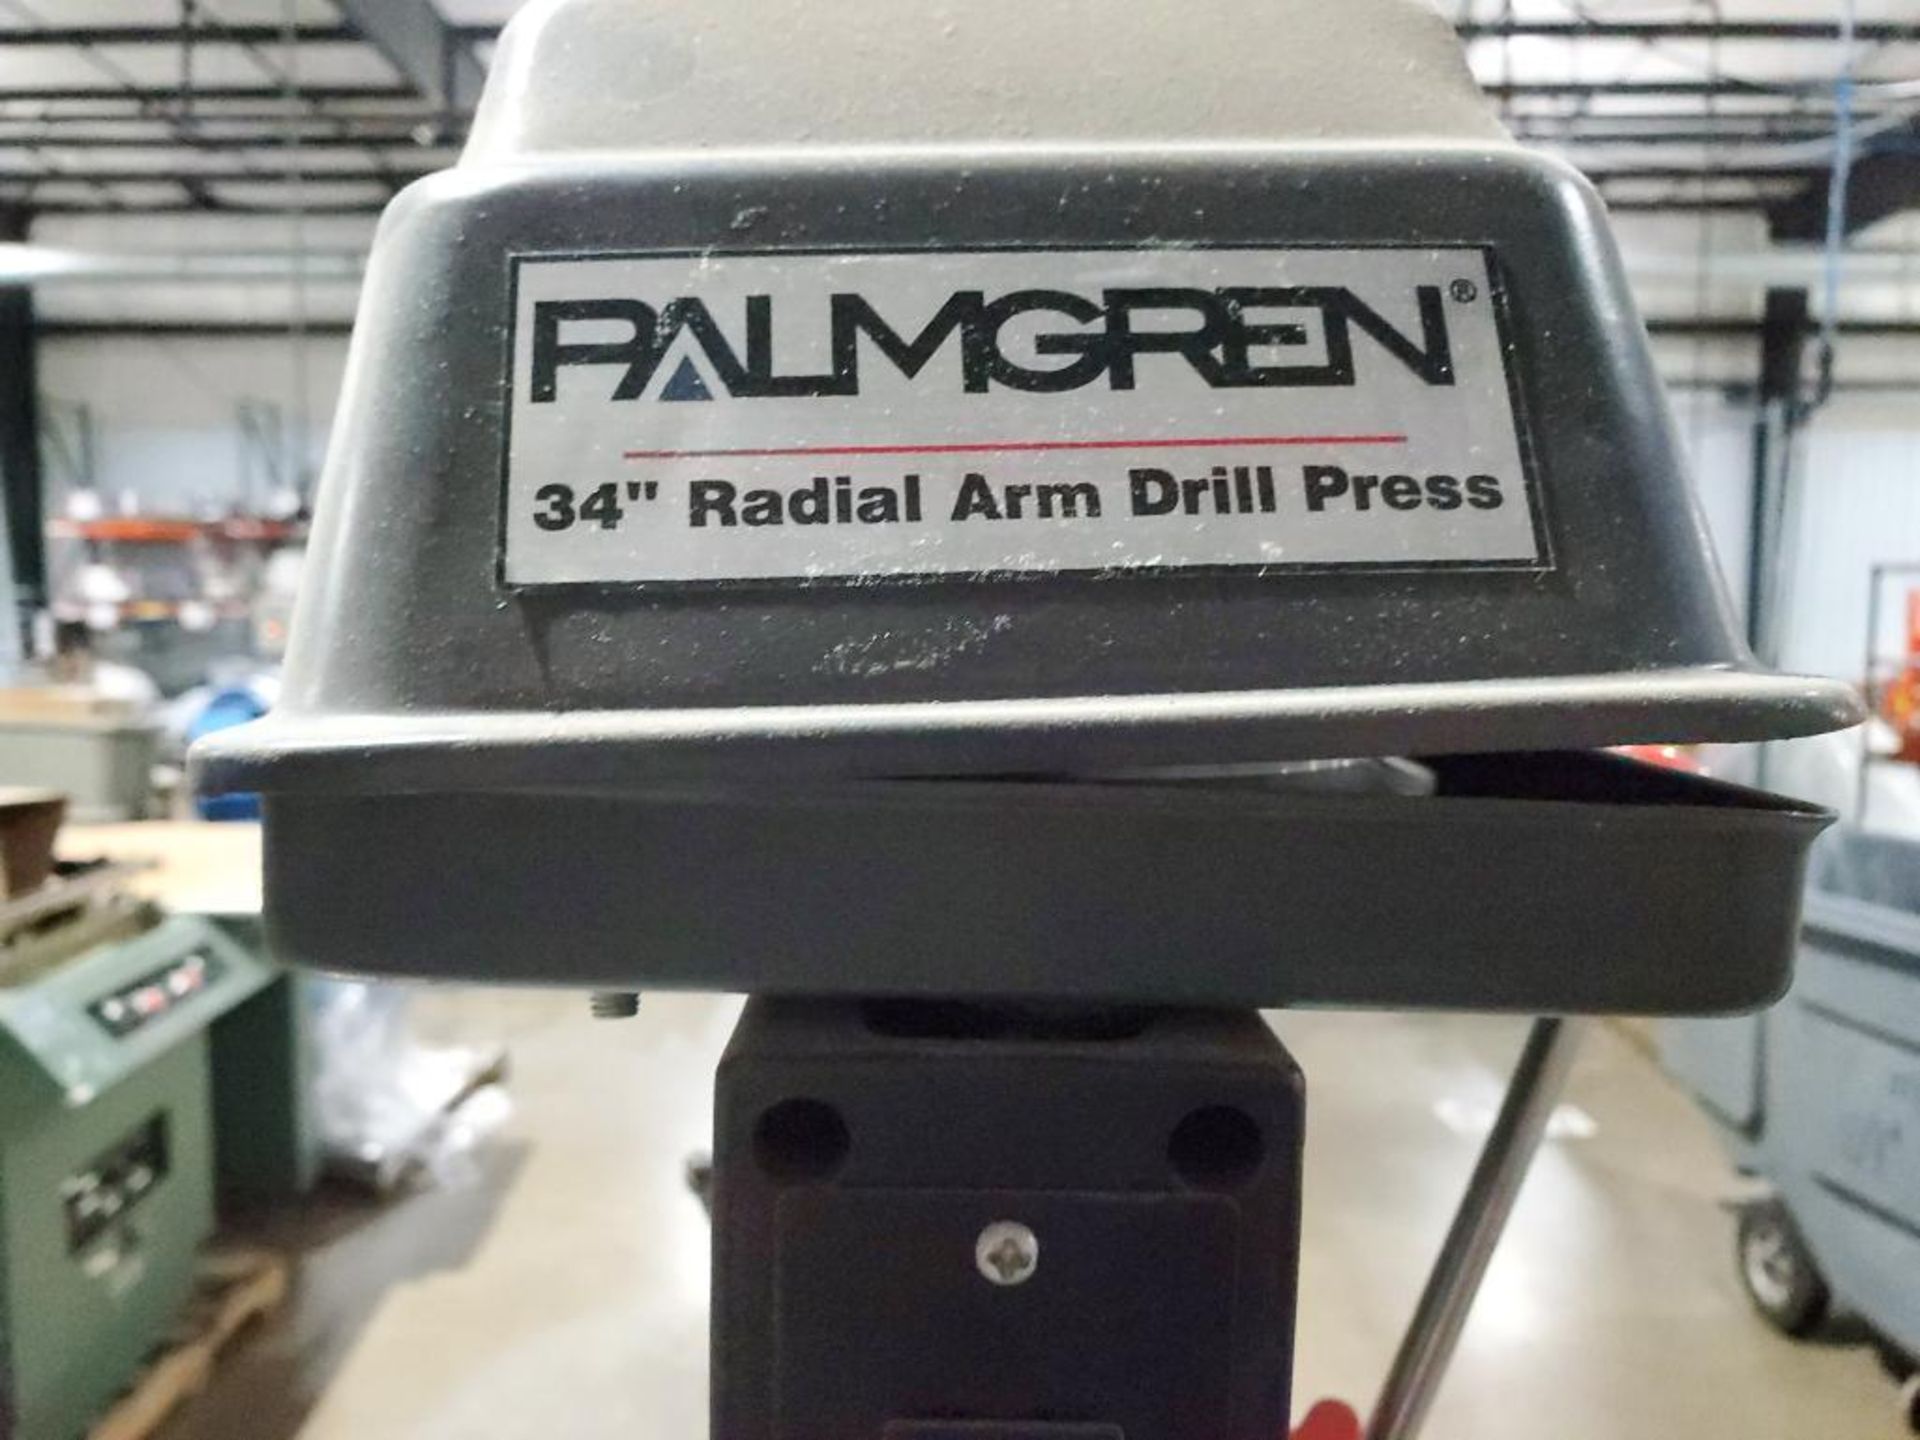 Palgren 34in radial arm drill press. 5 speed. Model 80341A. - Image 6 of 12